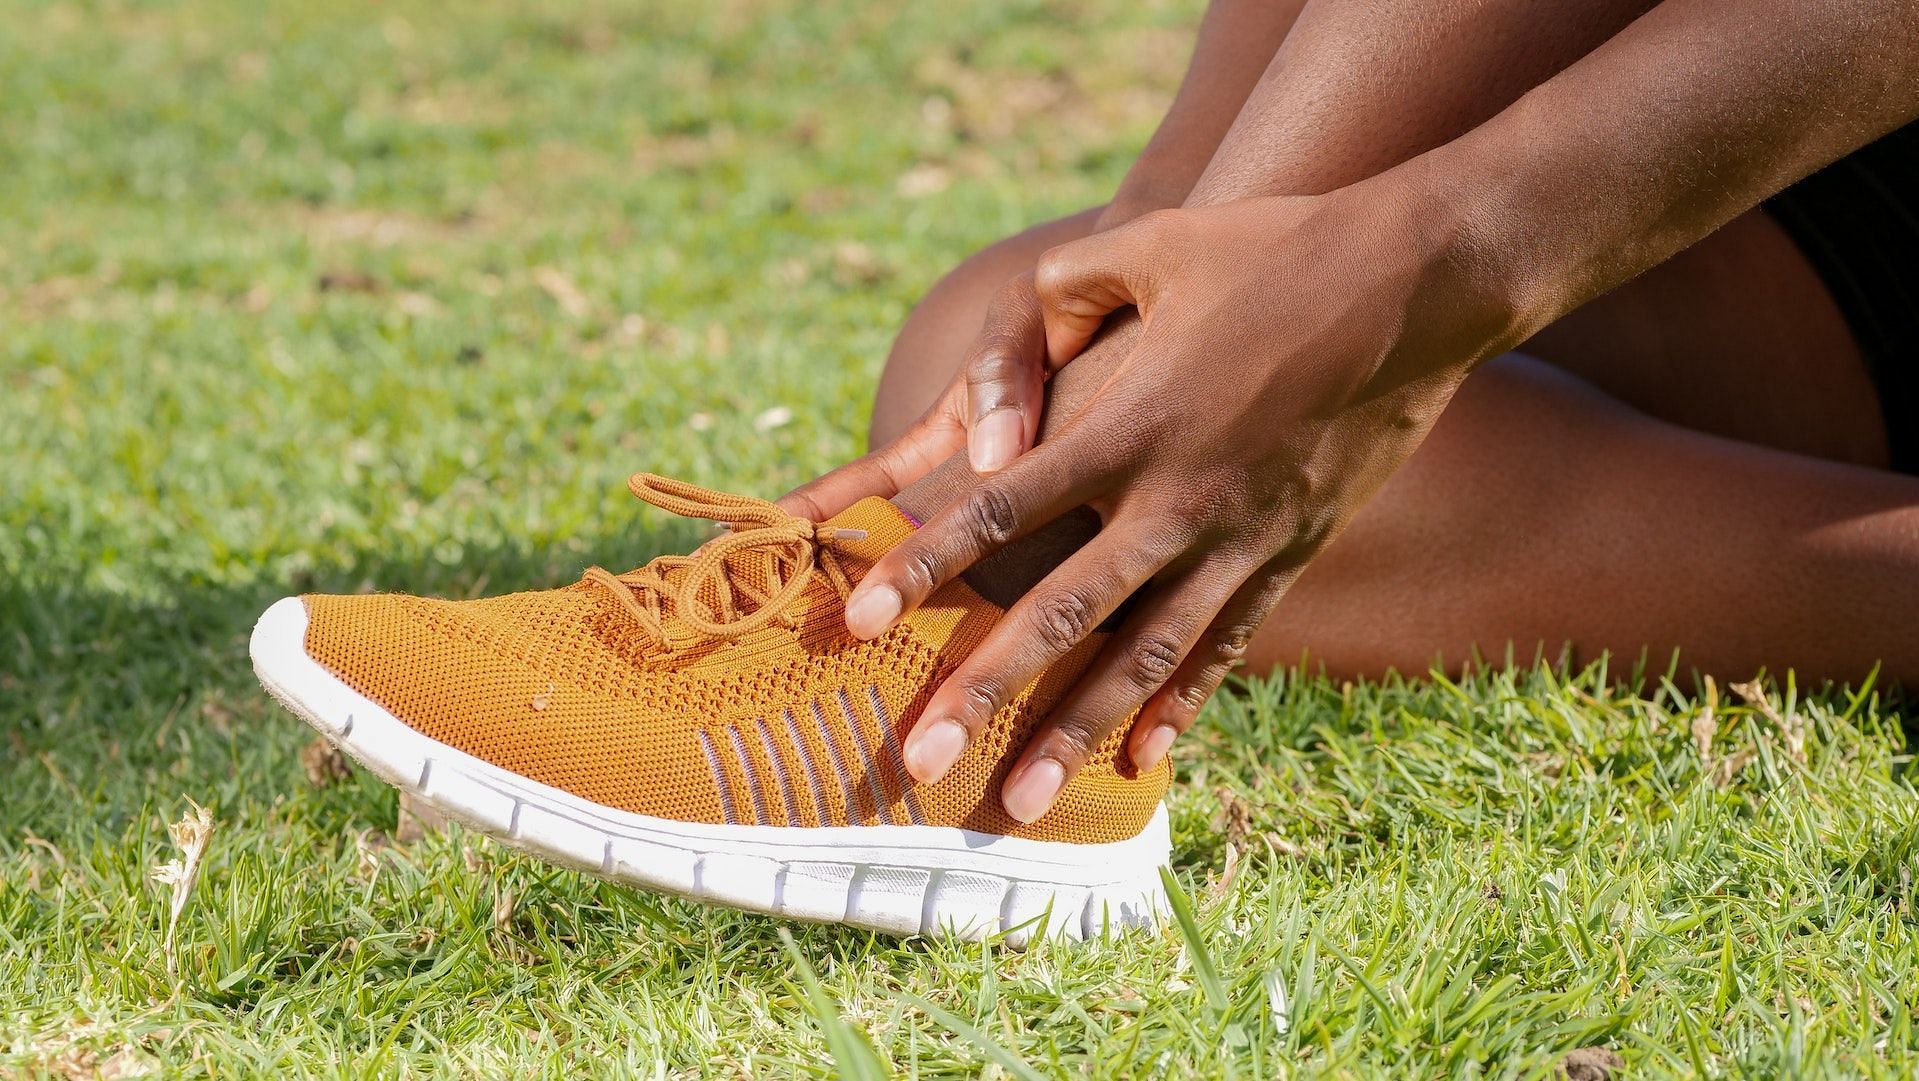 Ankle circles are the best sprained ankle workouts. (Photo via Pexels/Kindel Media)